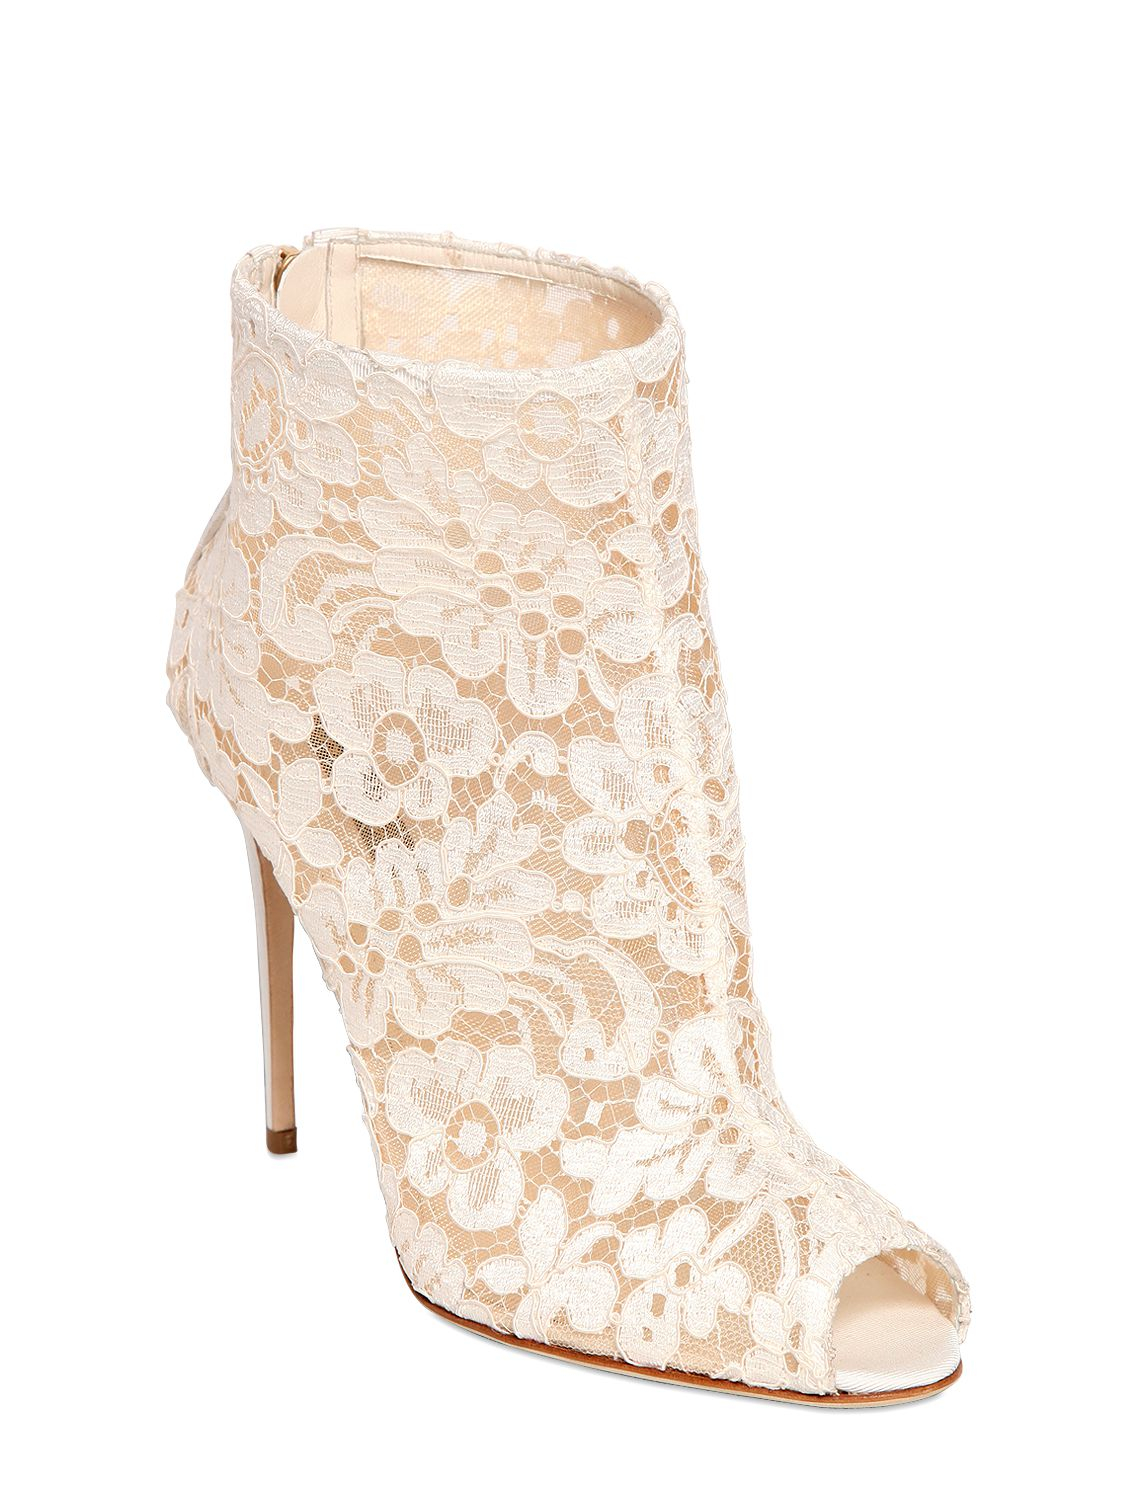 Dolce & Gabbana 105mm Beth Mesh Lace Peep-toe Boots in White | Lyst